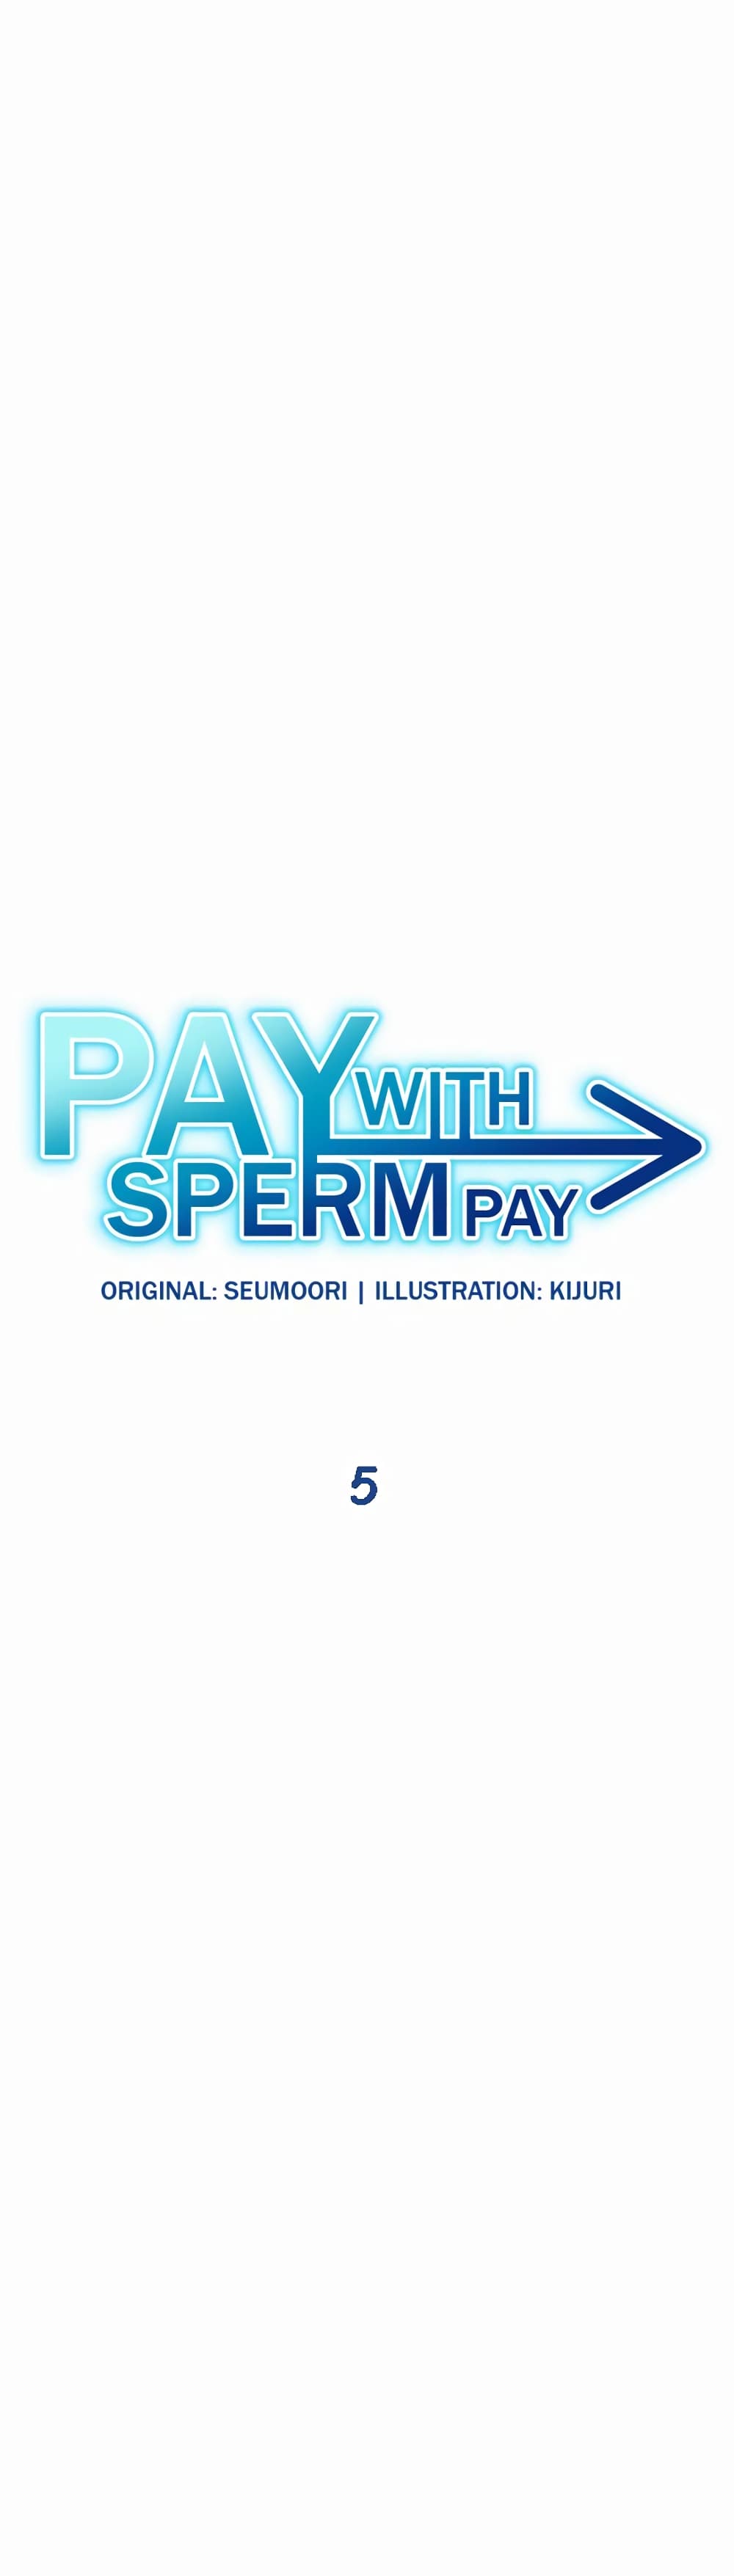 Pay with Sperm Pay 5-5